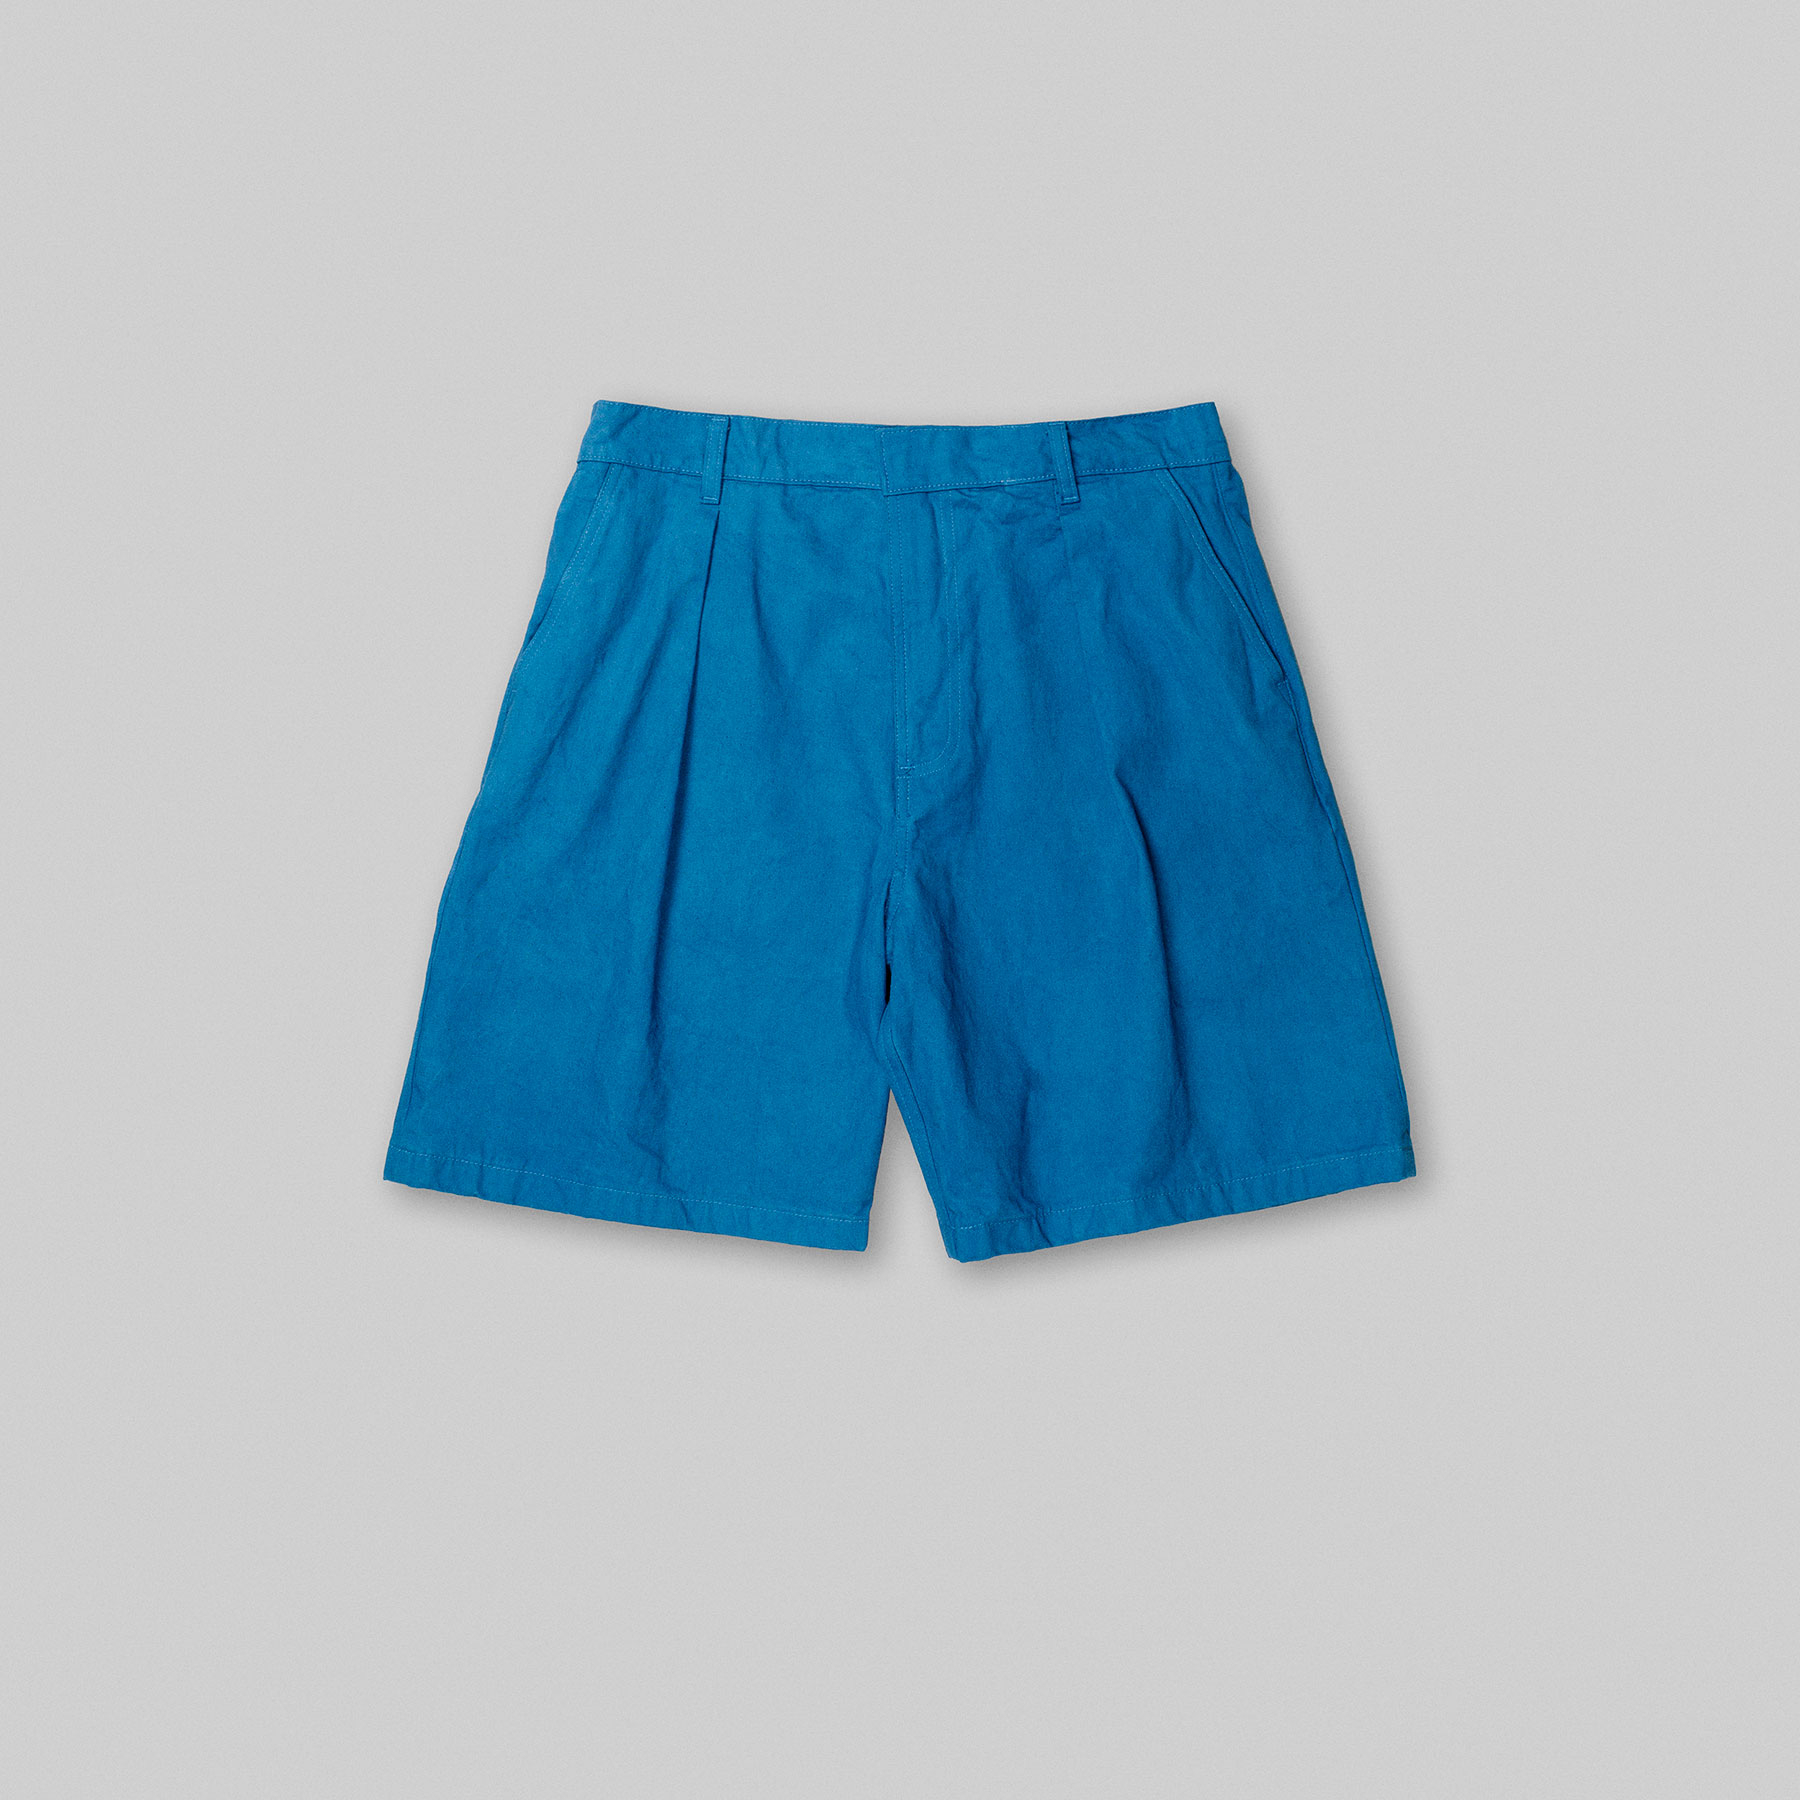 PAGE shorts by Arpenteur in Medium woad color